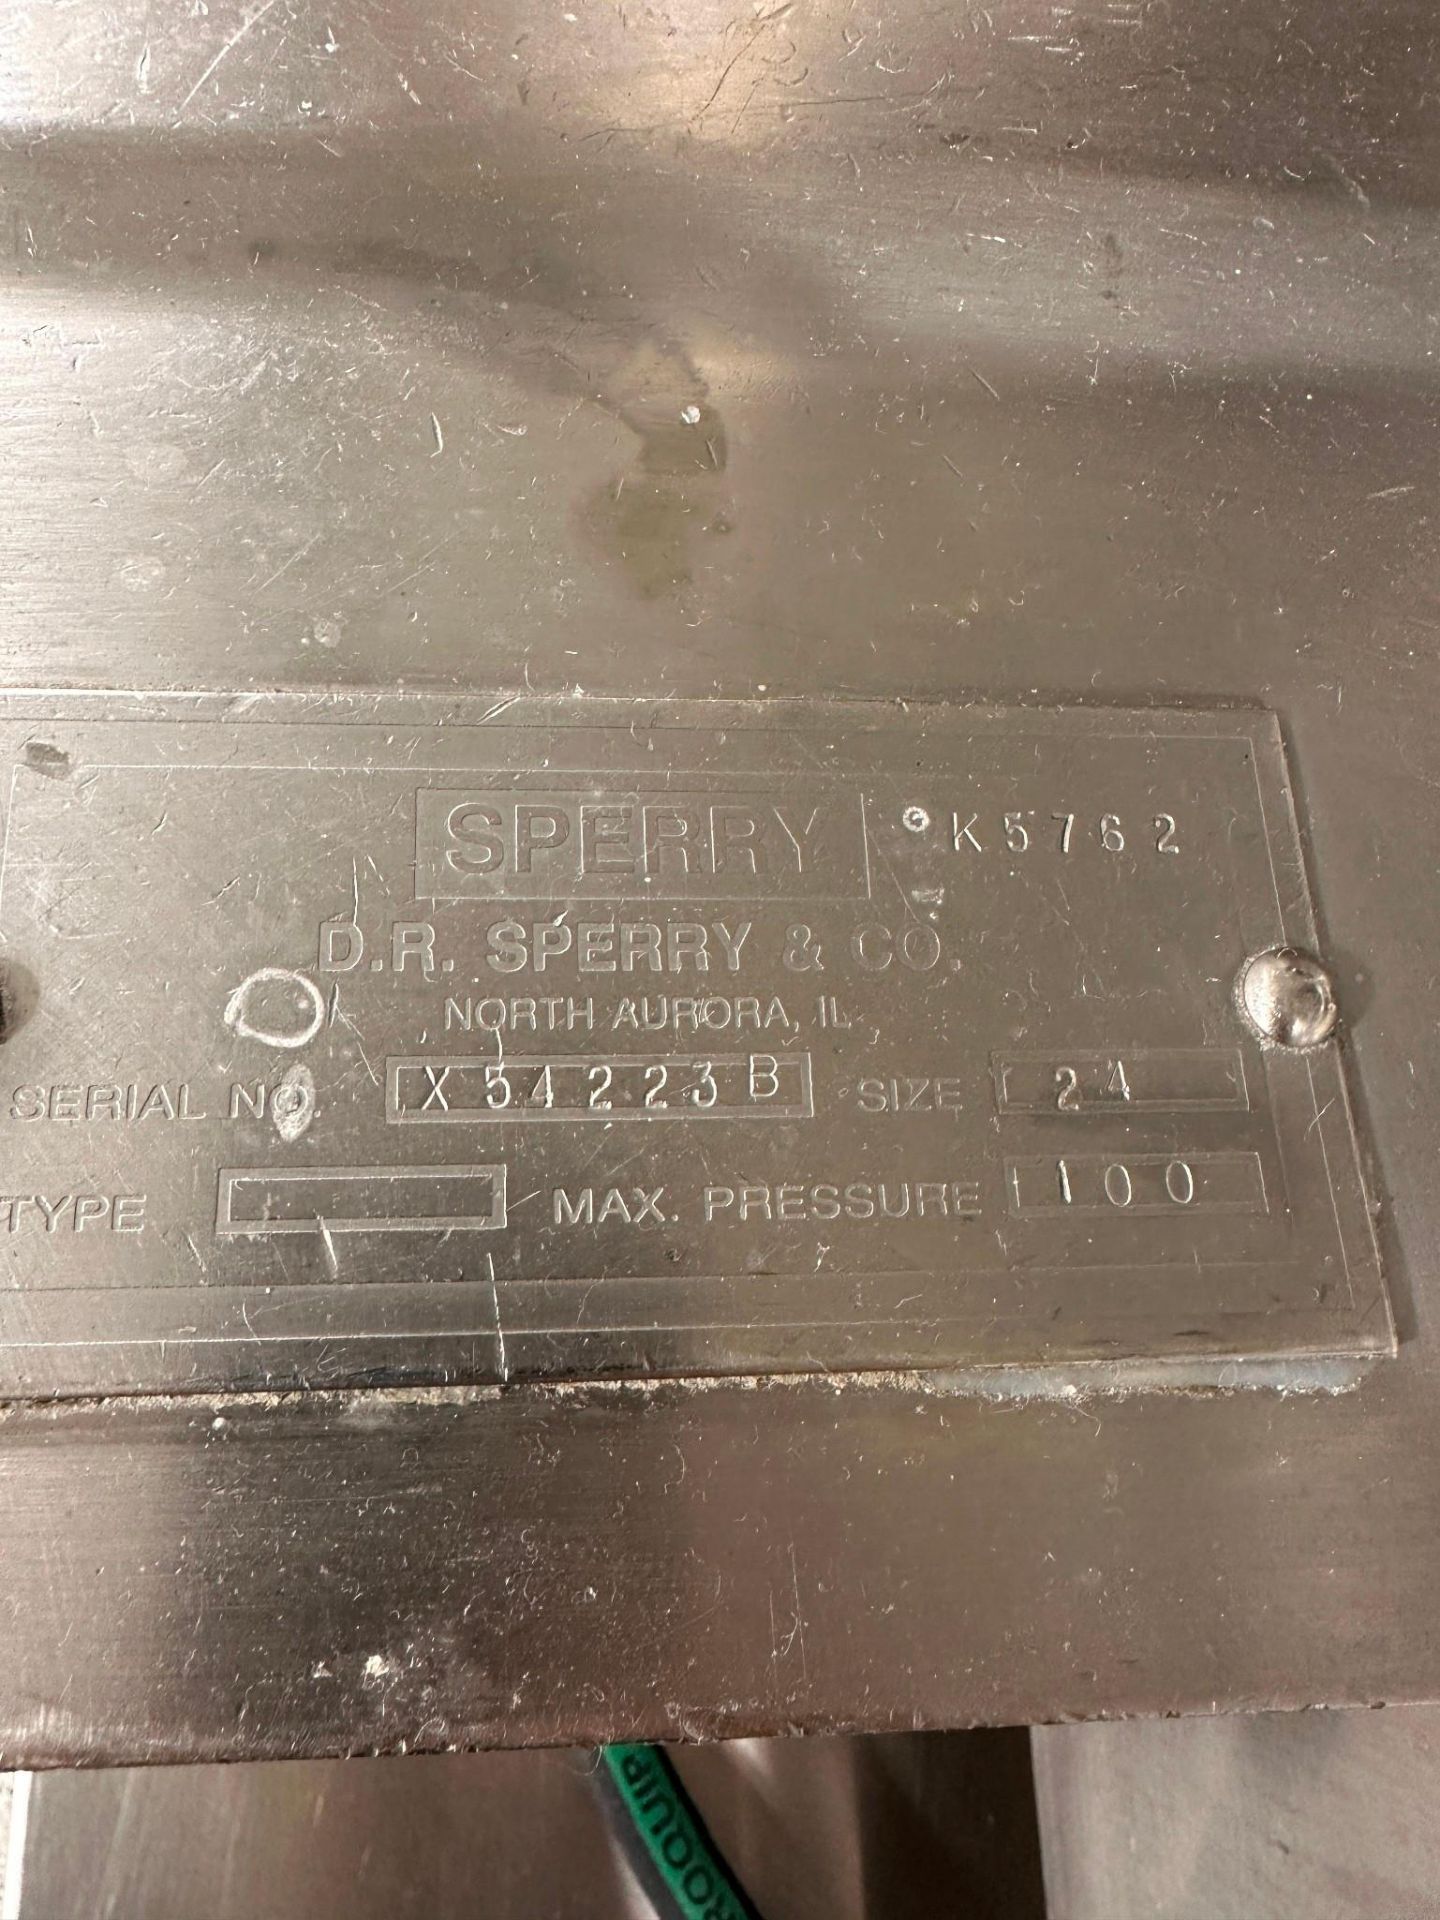 S/S SPERRY FILTER PRESS SERIAL X54223B - Image 7 of 8